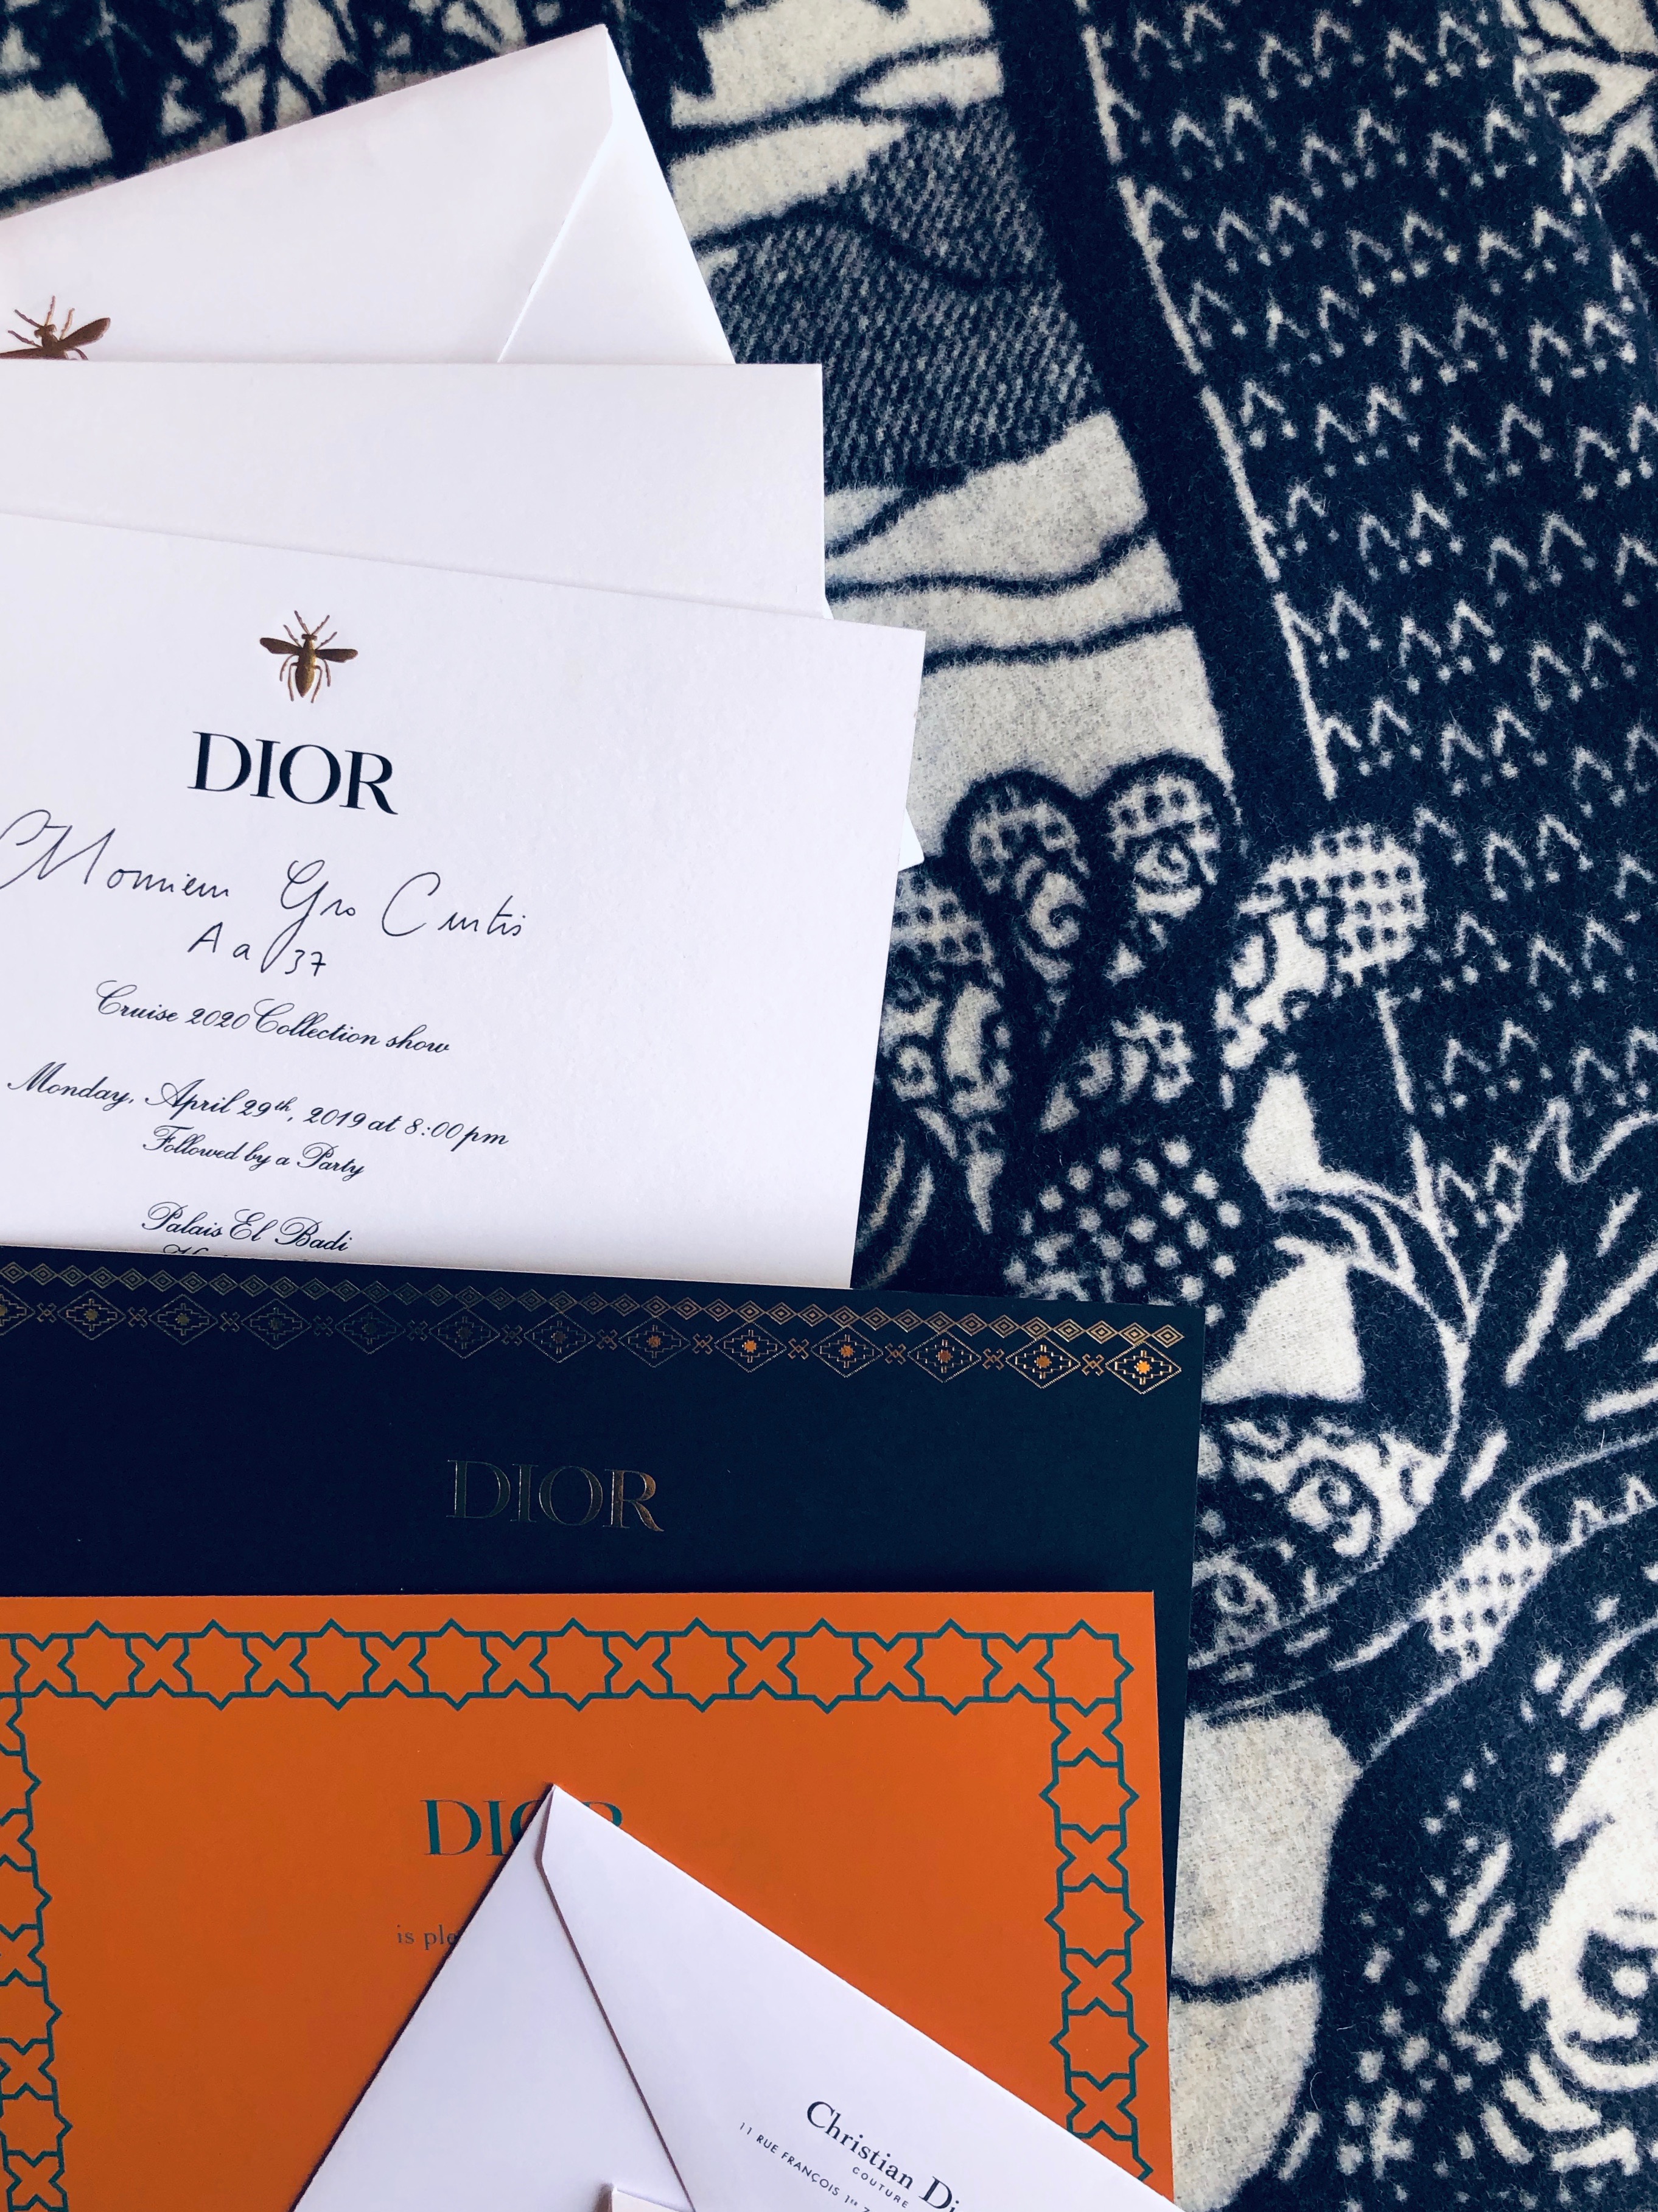  Invitations and Dior blanket